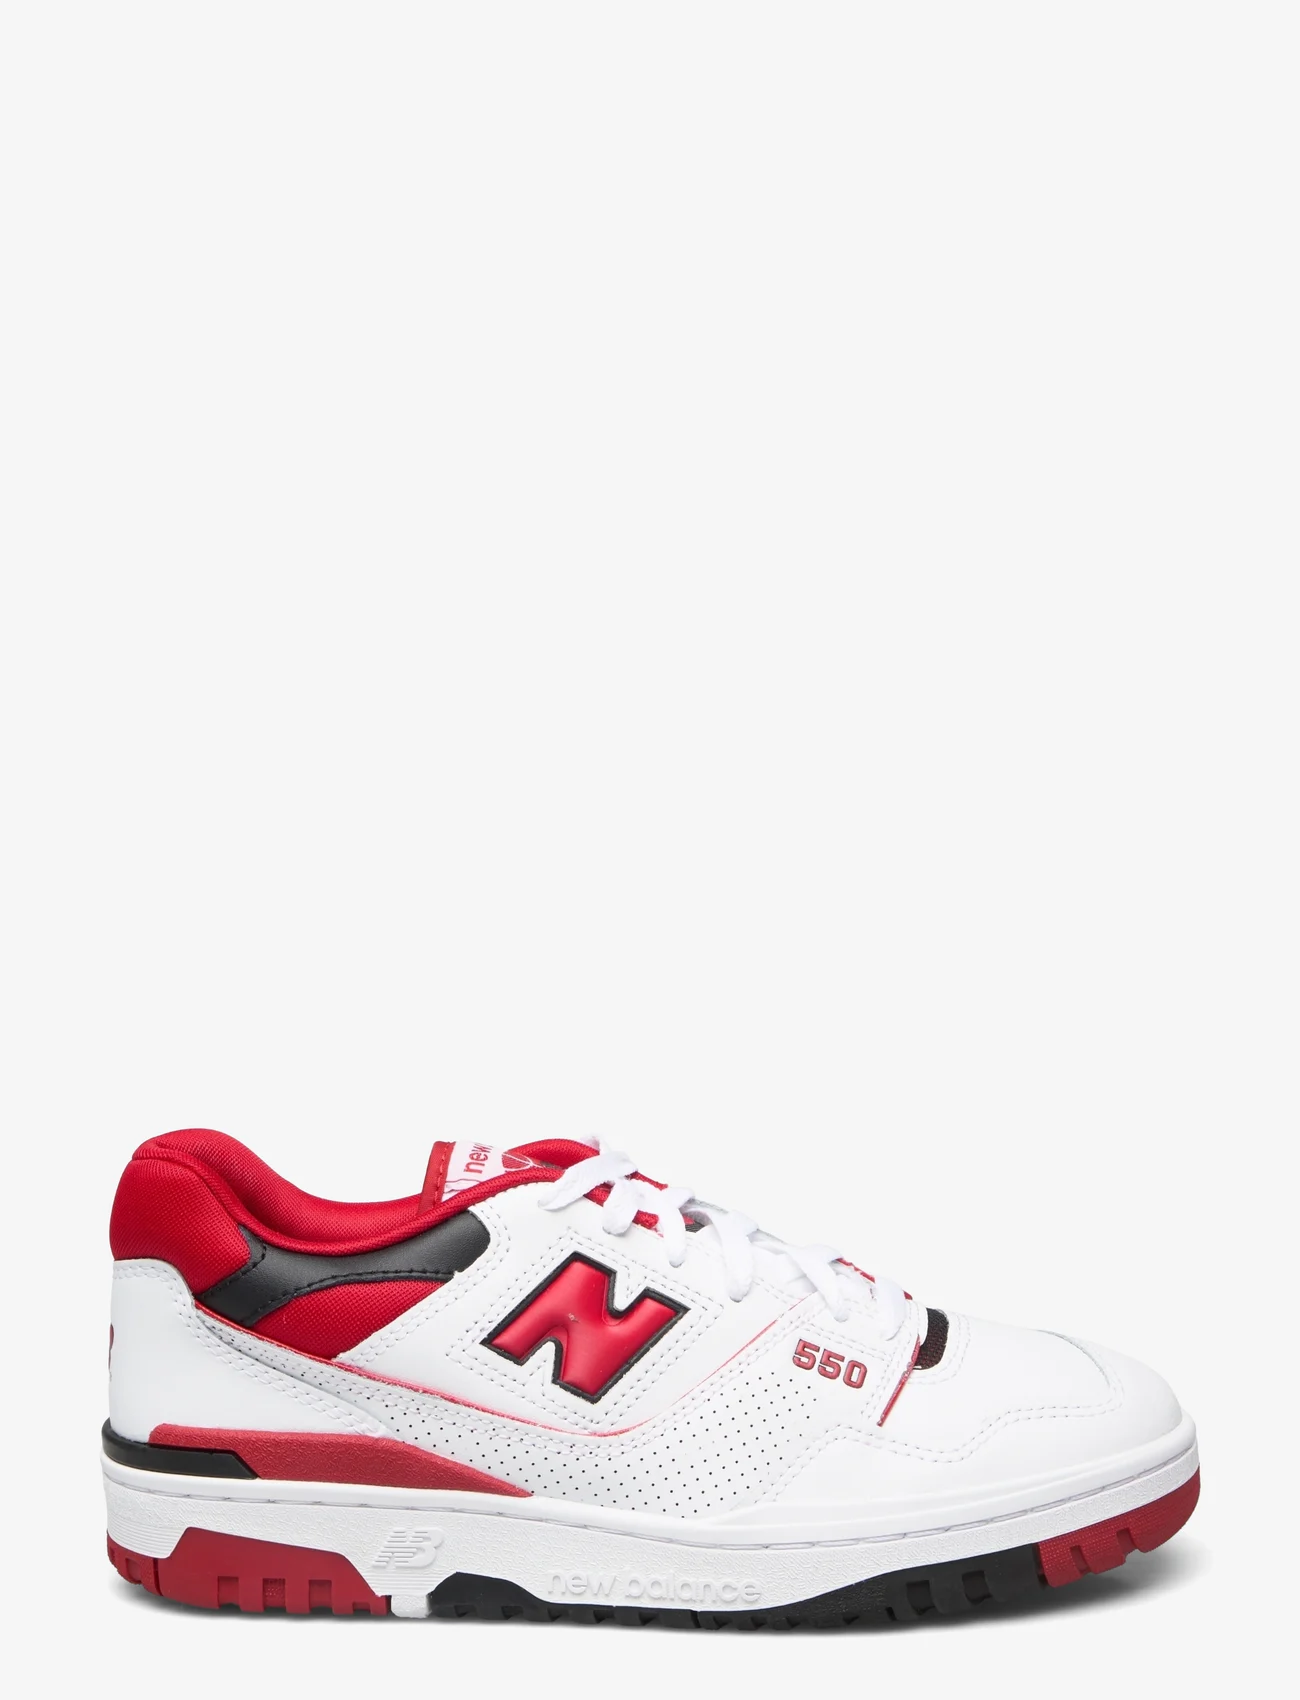 New Balance - New Balance 550 - laag sneakers - white/red - 1